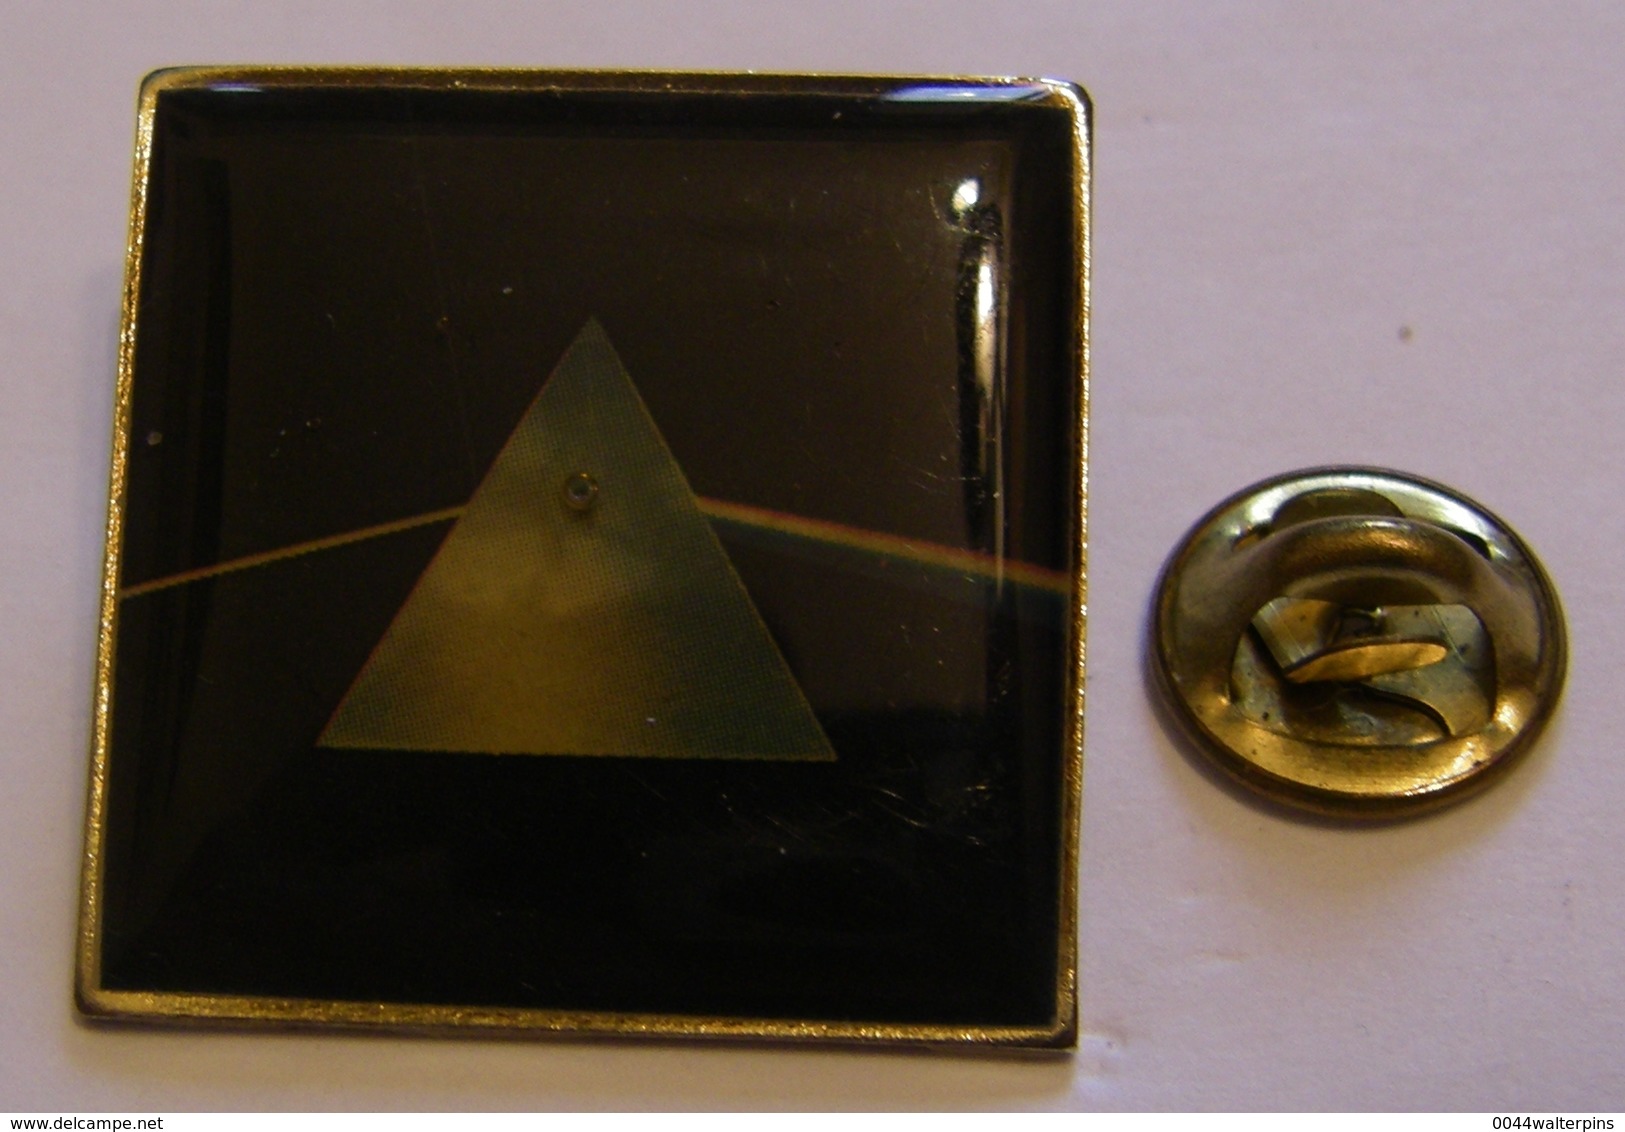 PINK FLOYD THE DARK SIDE OF THE MOON ALBUM POPLIGHT COLLECTION Limited Edition Limit. Numero Number #2697 Pin Pin's Pins - Musique